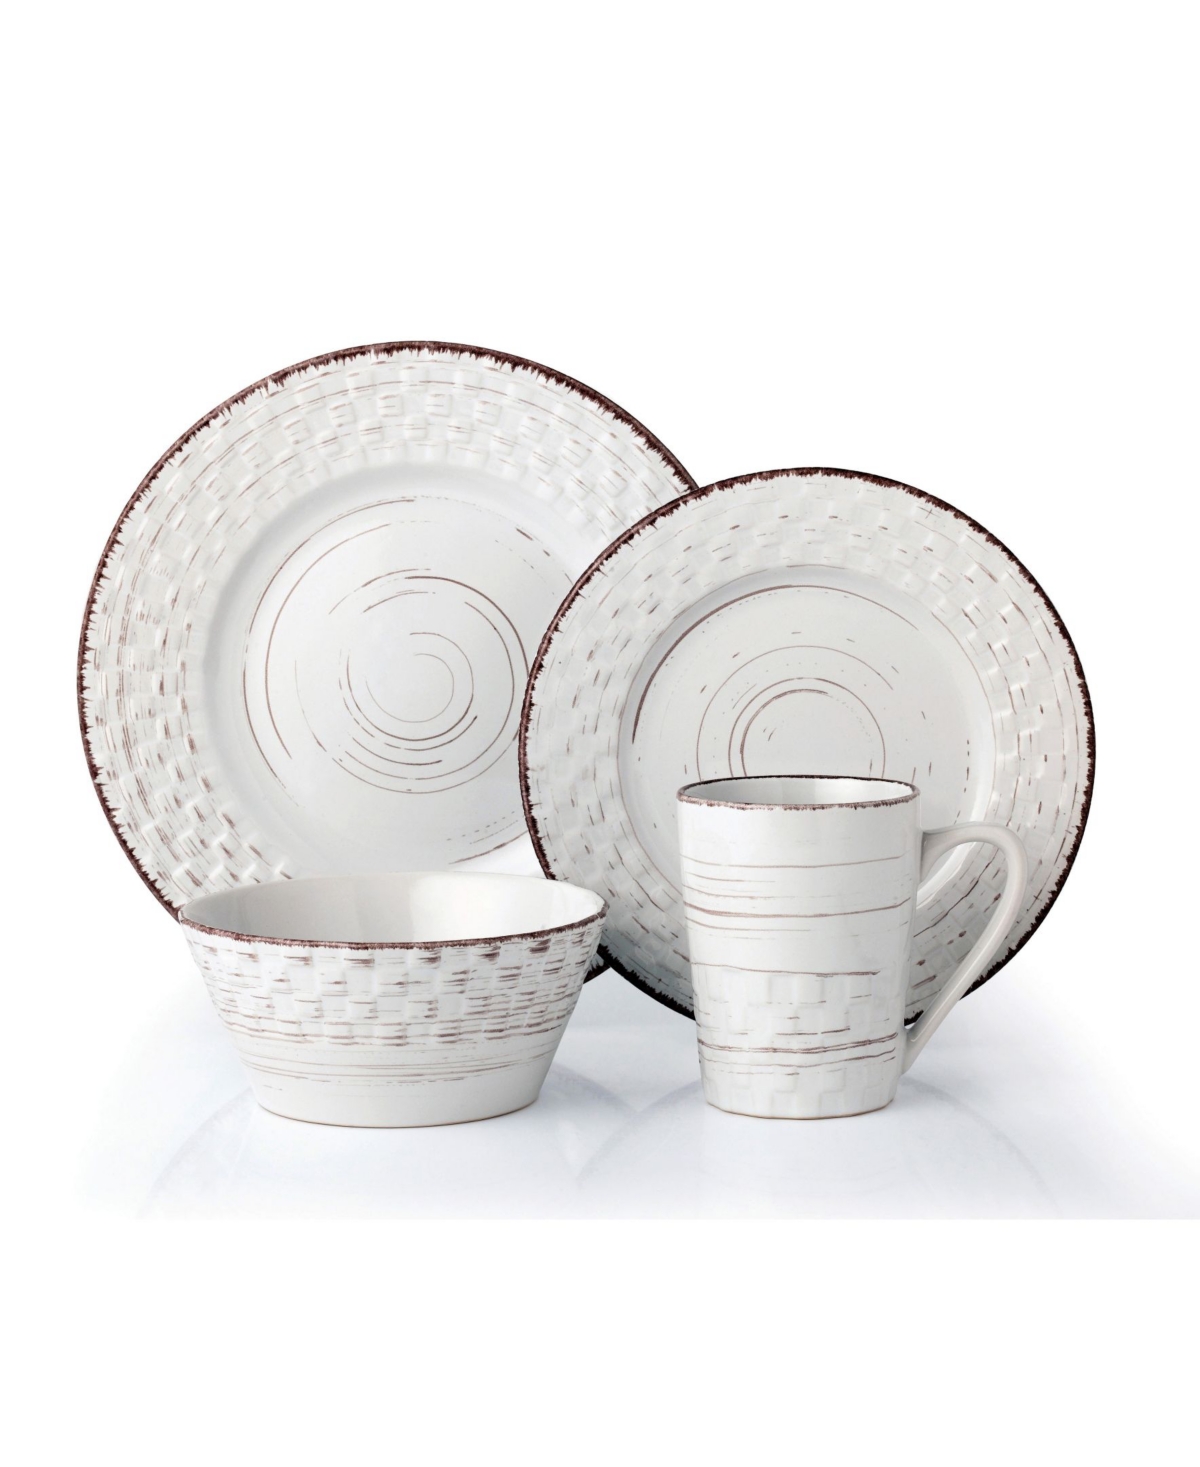 16 Piece Distressed Weave Dinnerware Set, Service for 4 - White